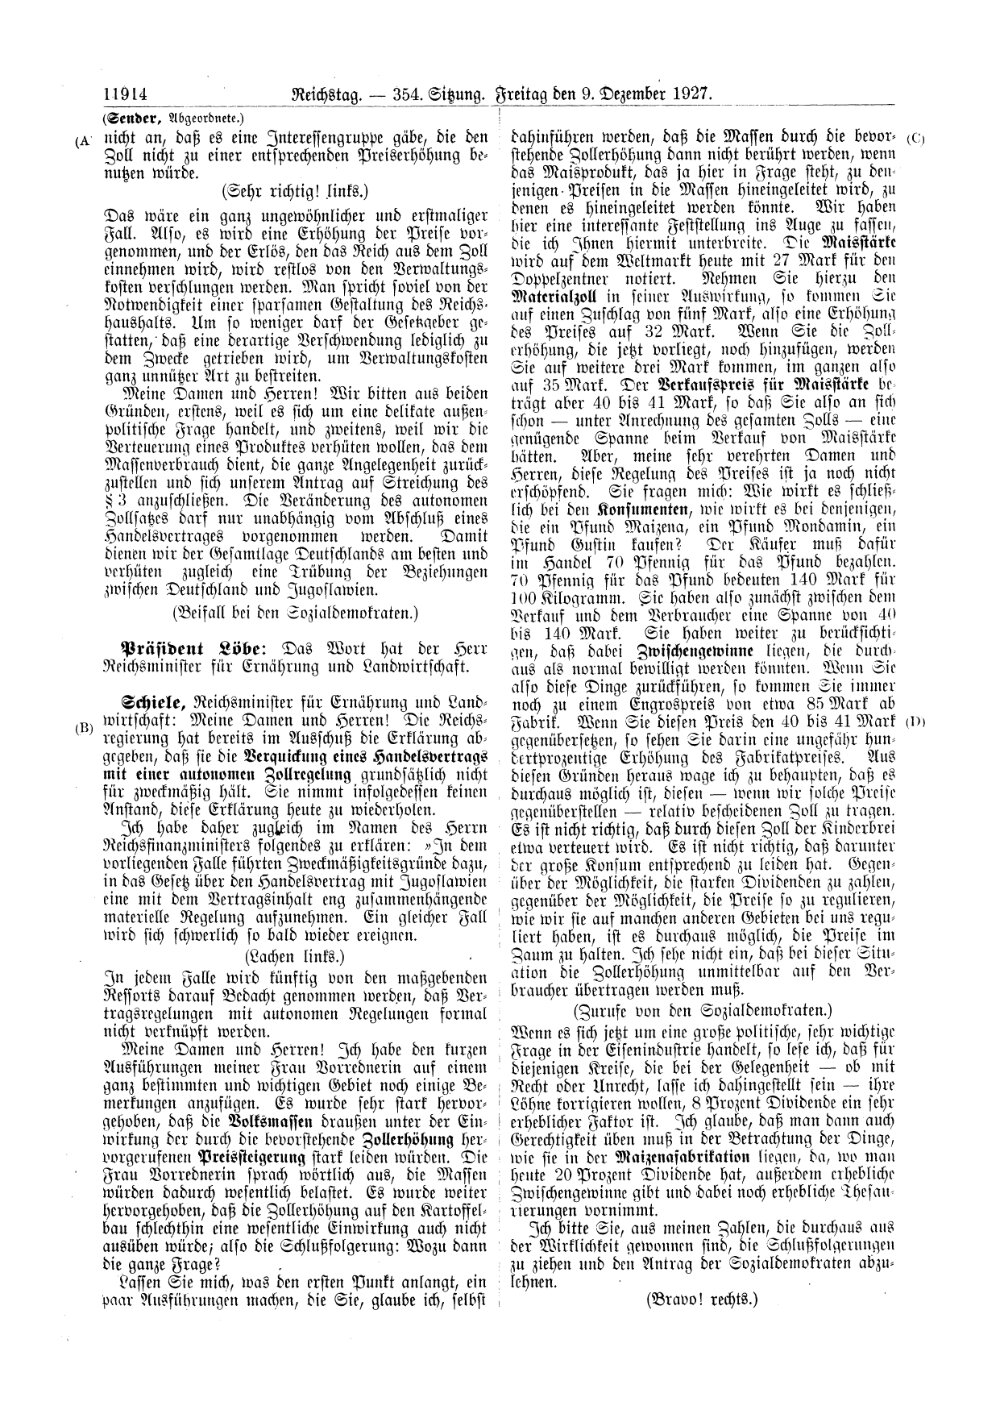 Scan of page 11914